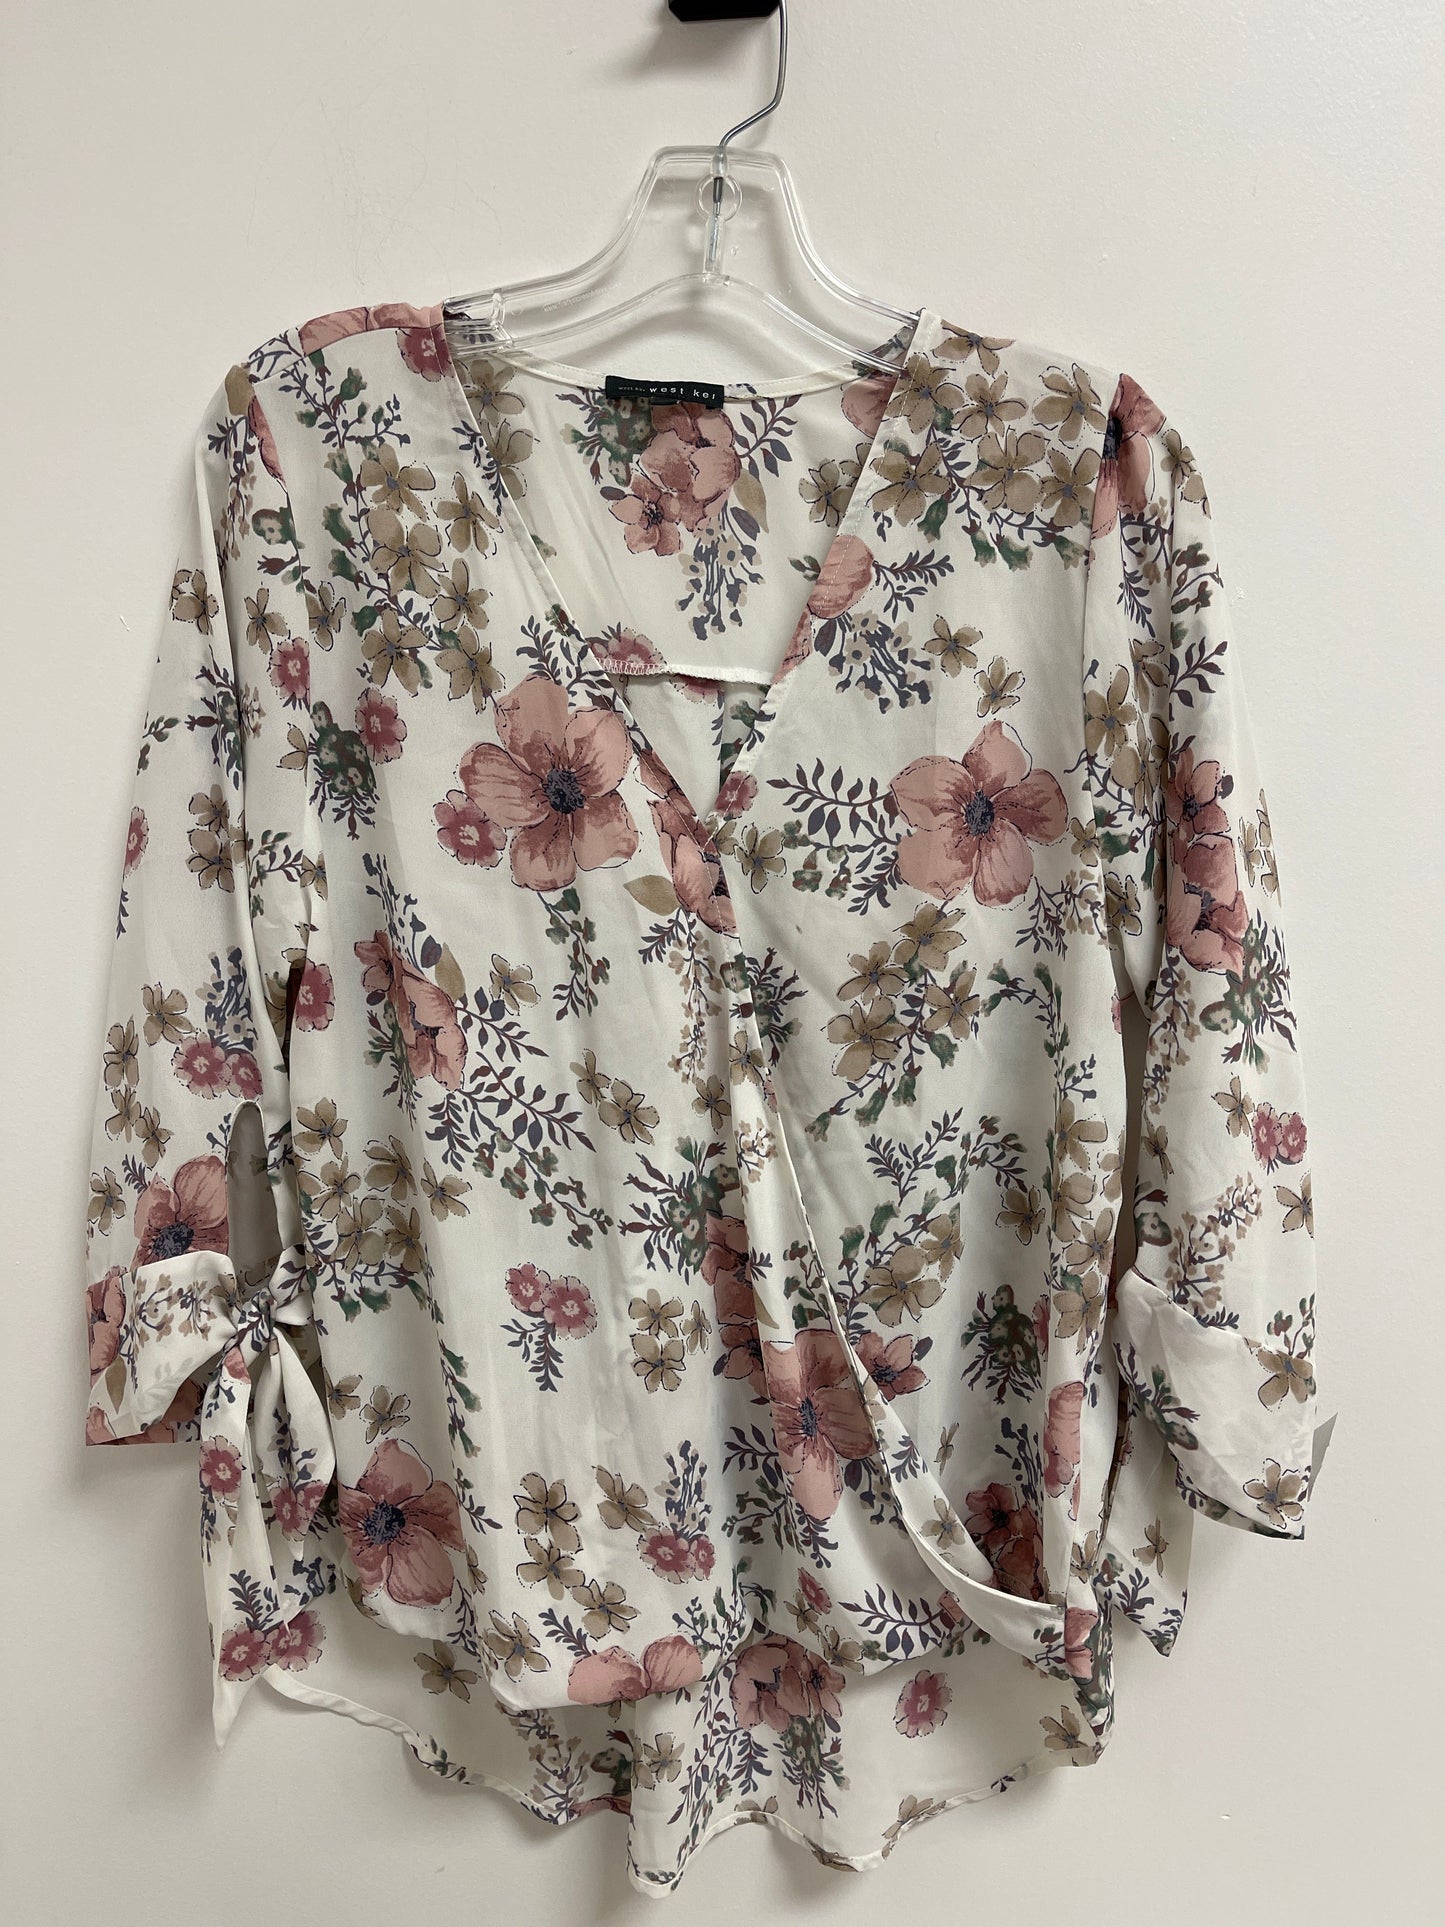 Floral Print Top Long Sleeve West Kei, Size M